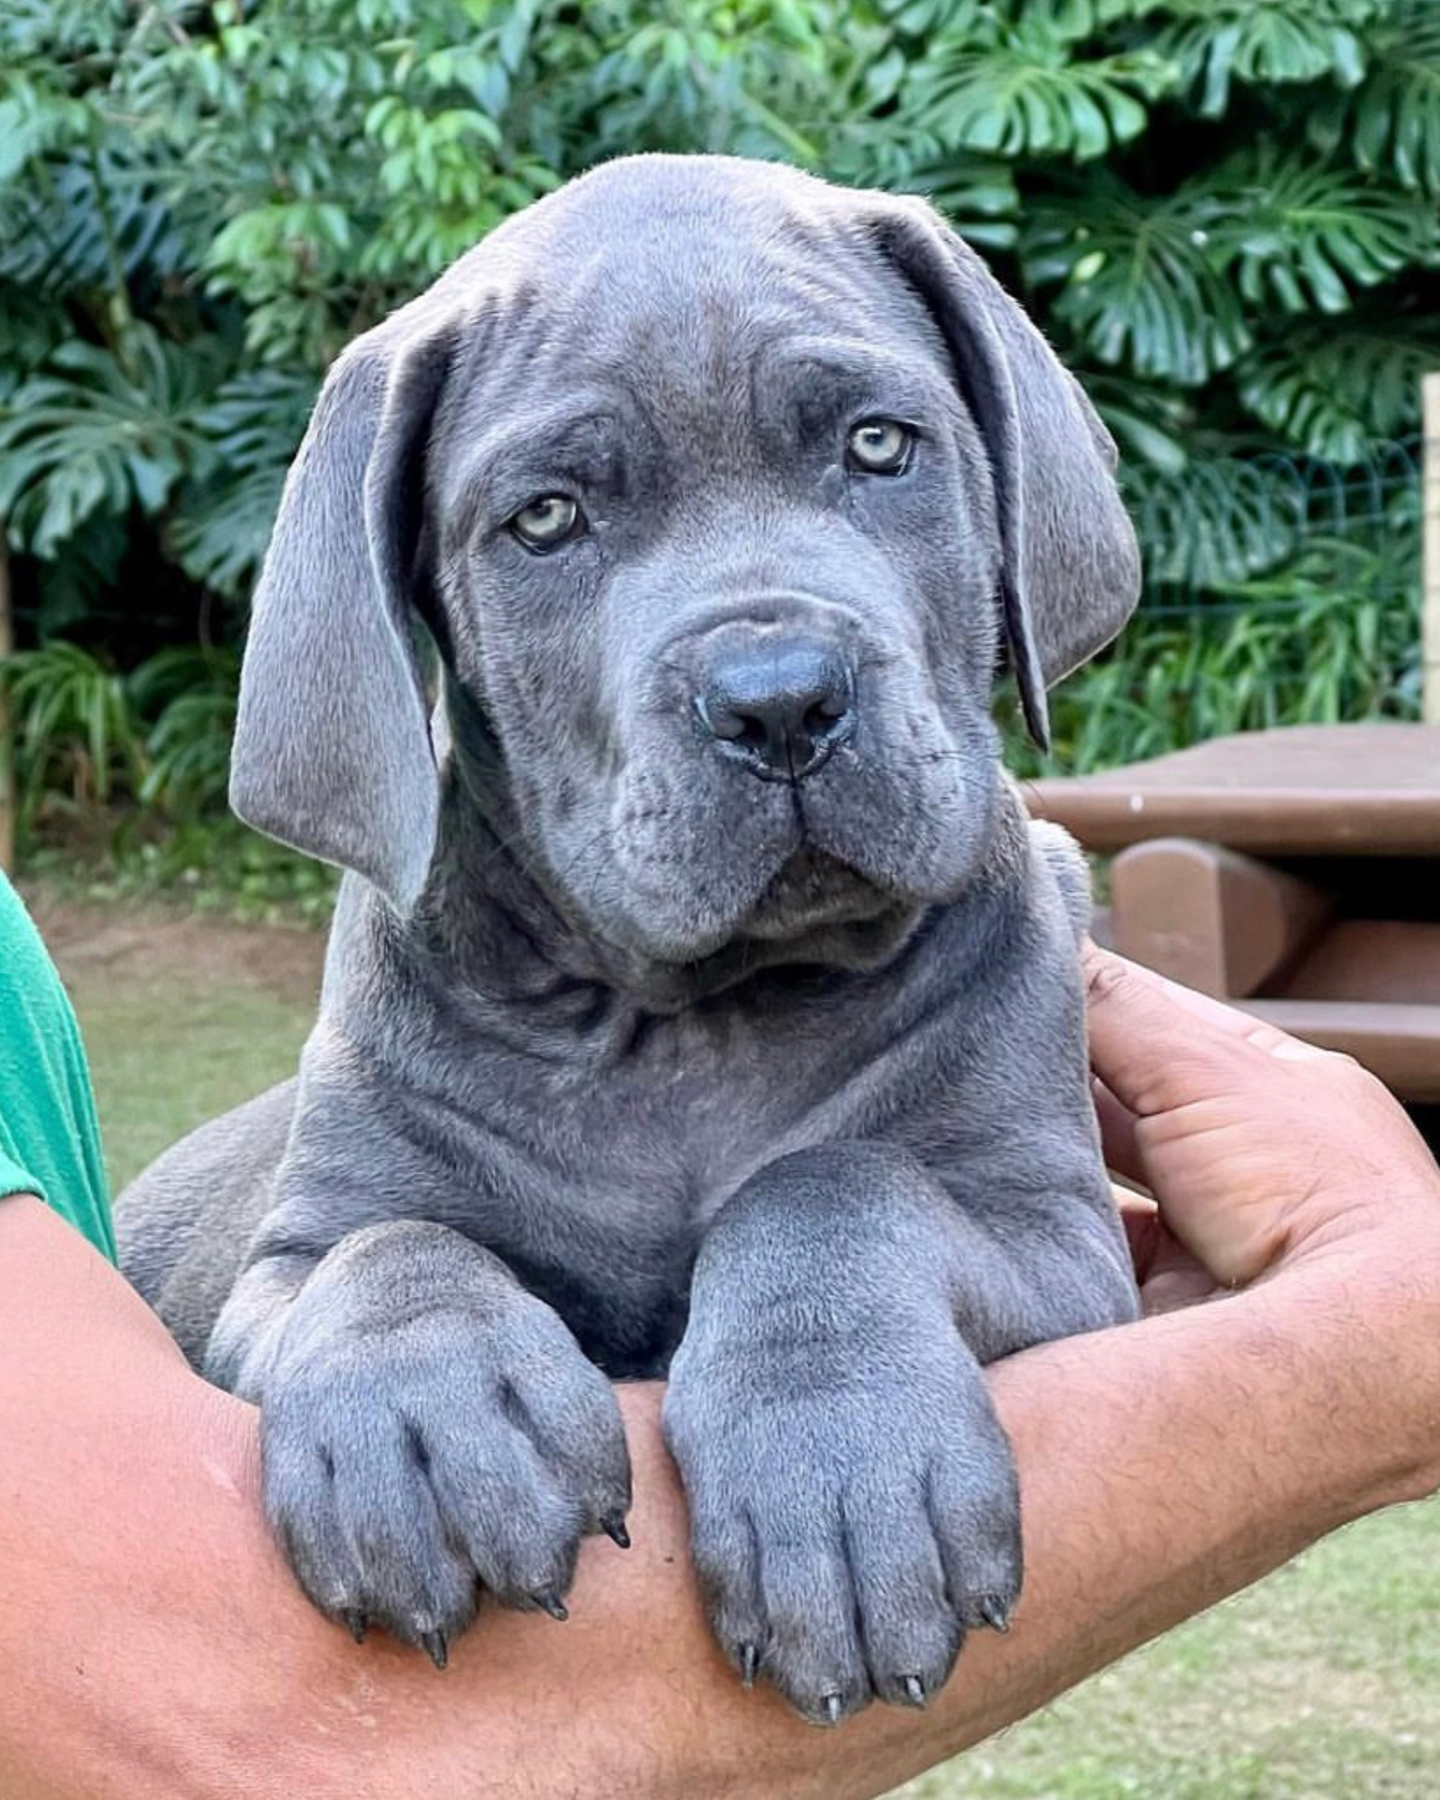 A Cane Corso Puppy in the arms of his owner